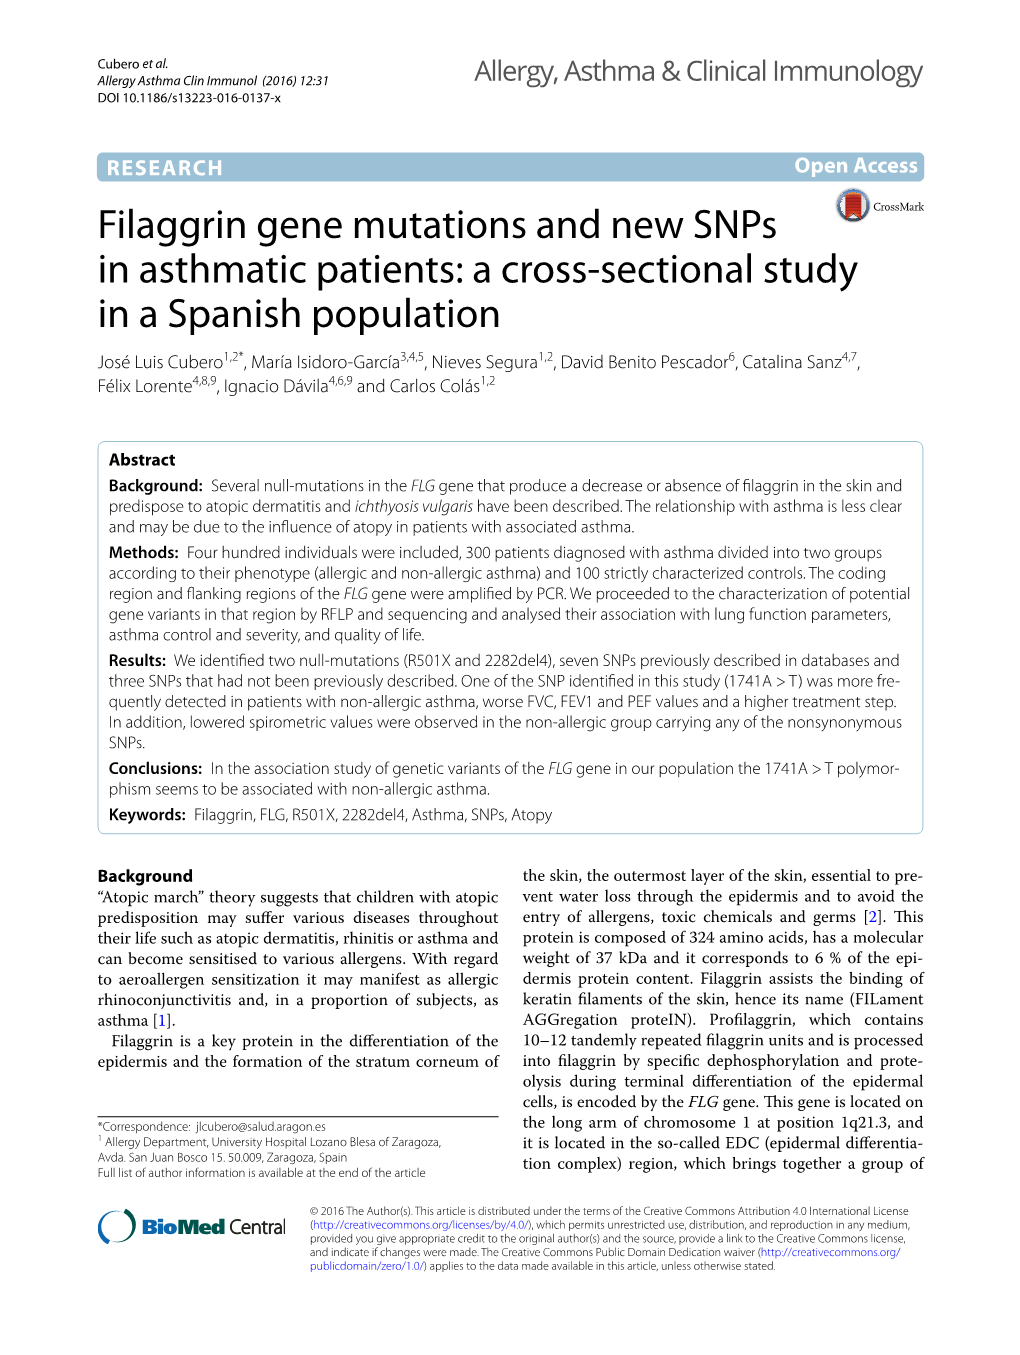 Filaggrin Gene Mutations and New Snps in Asthmatic Patients